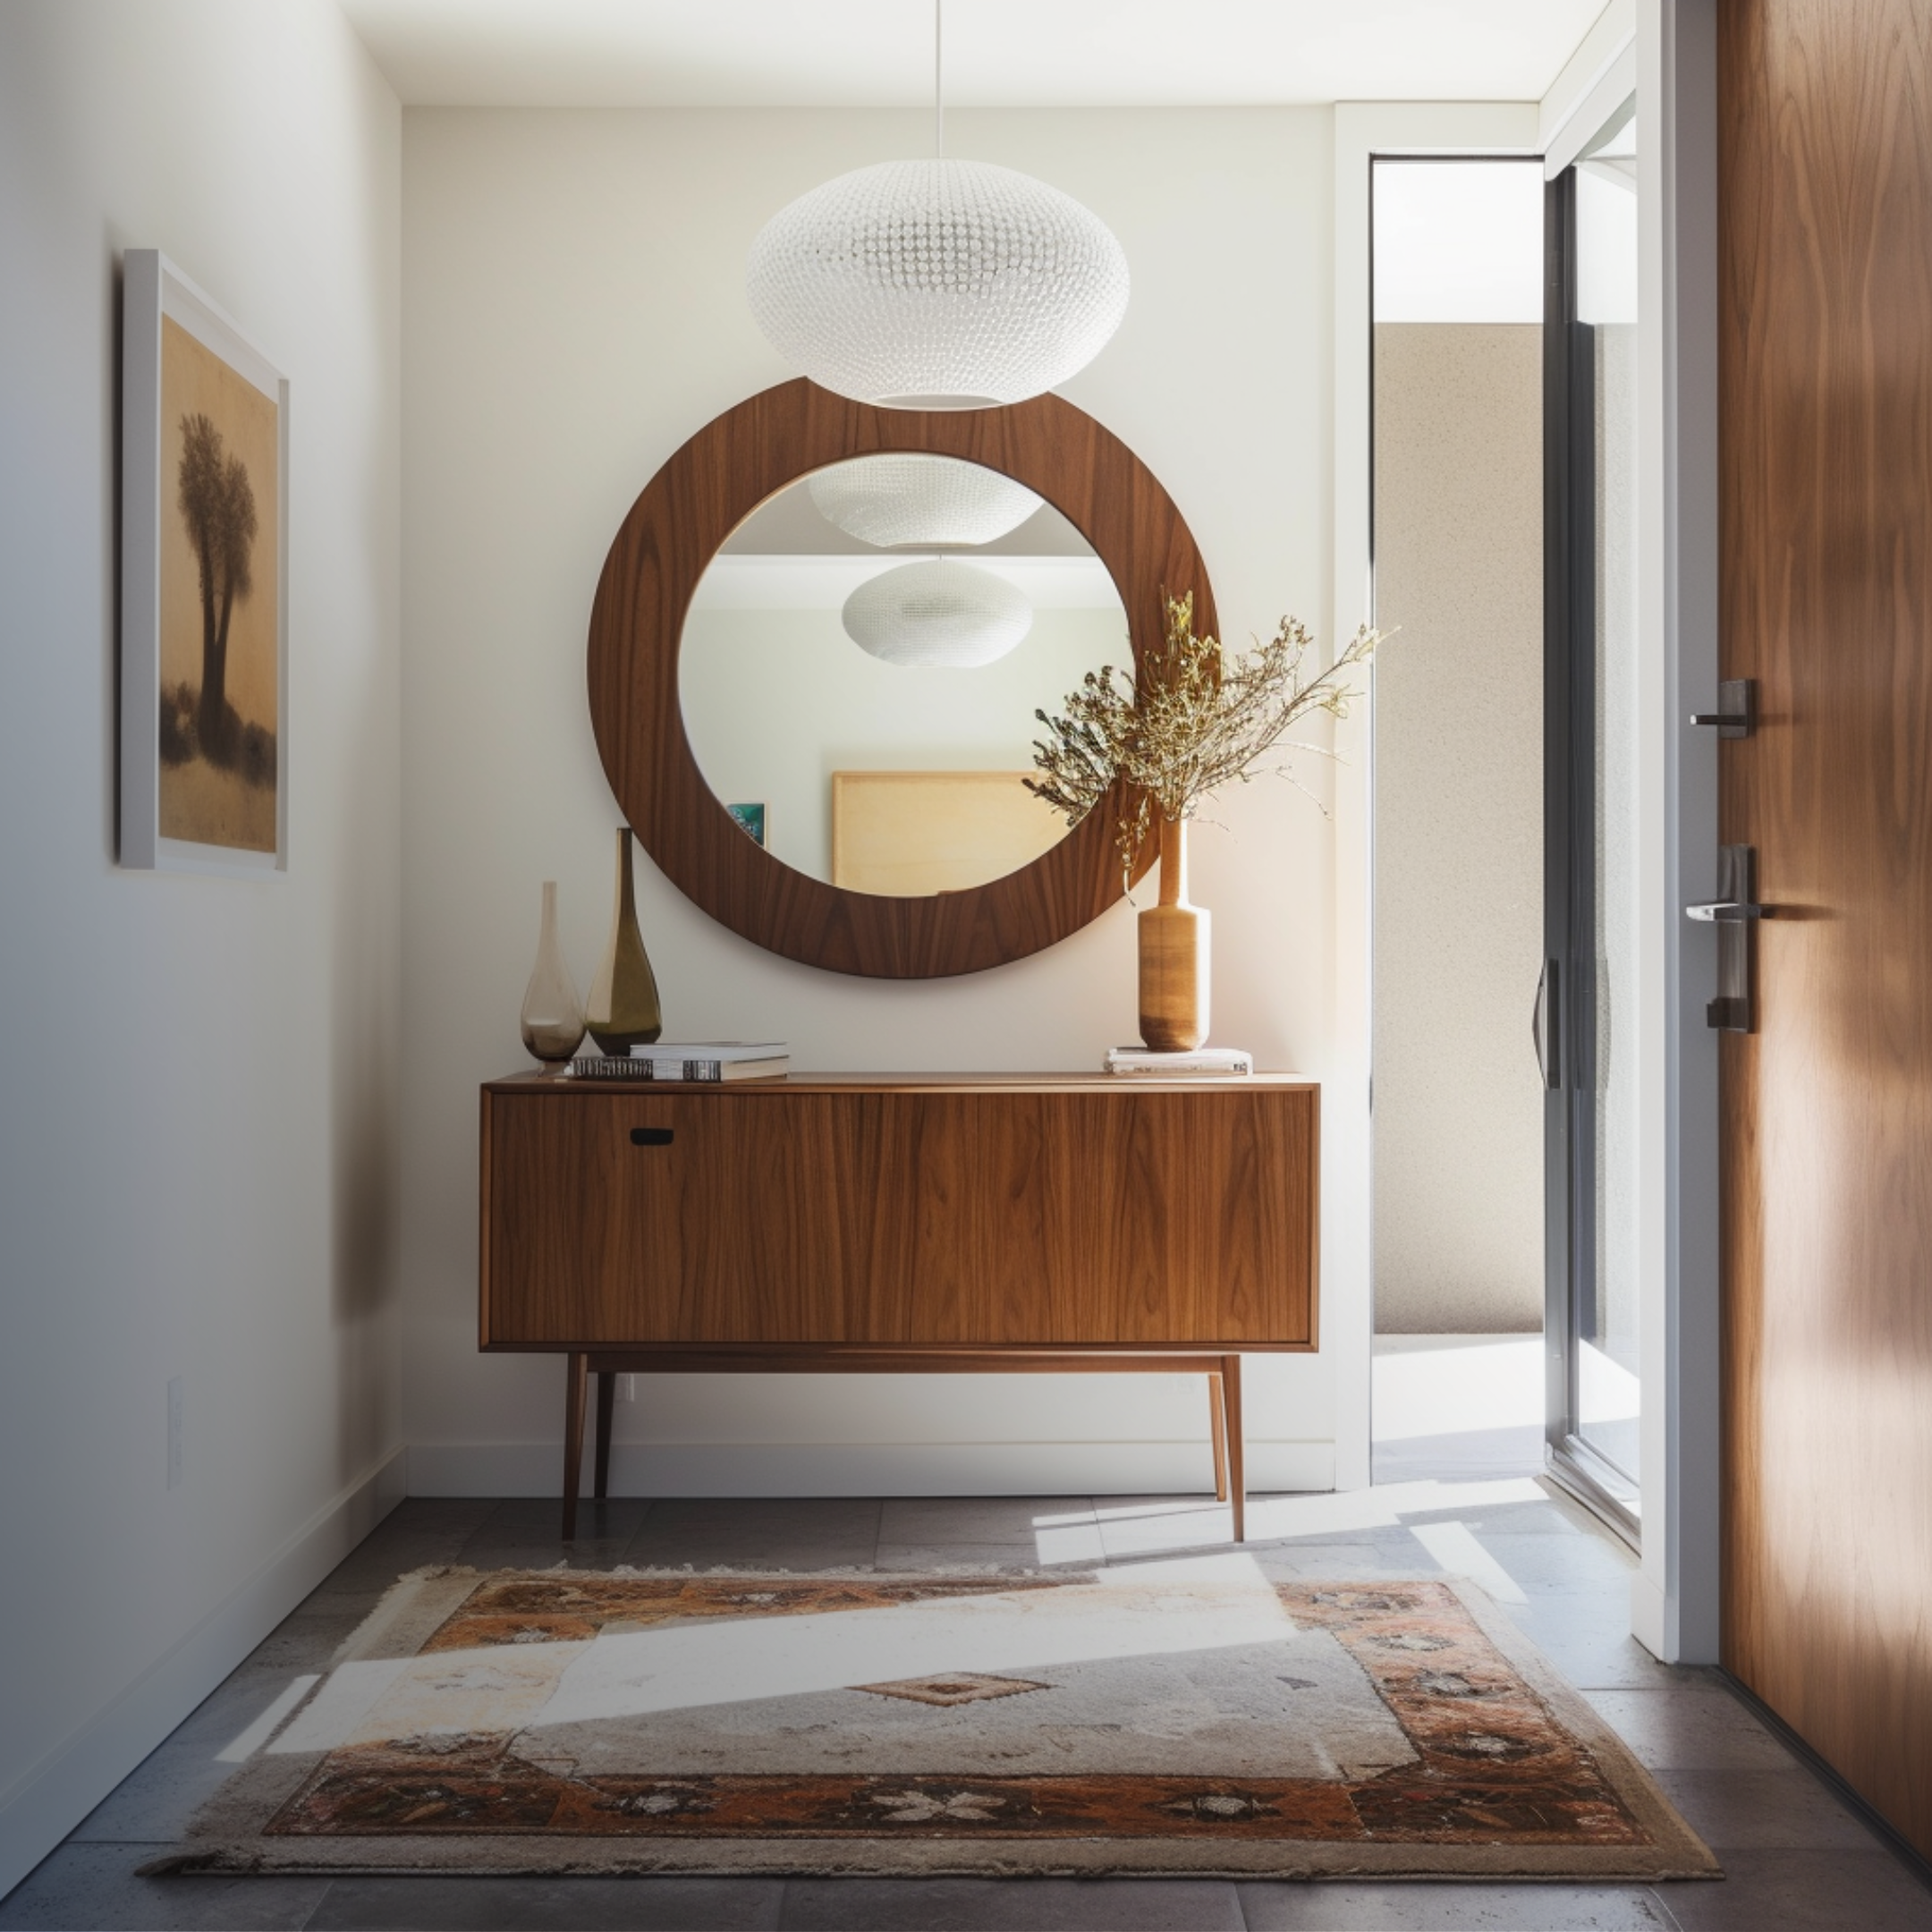 Transform your entryway in Tacoma, Washington with chic furniture options including benches, console tables, and storage solutions for a welcoming first impression.